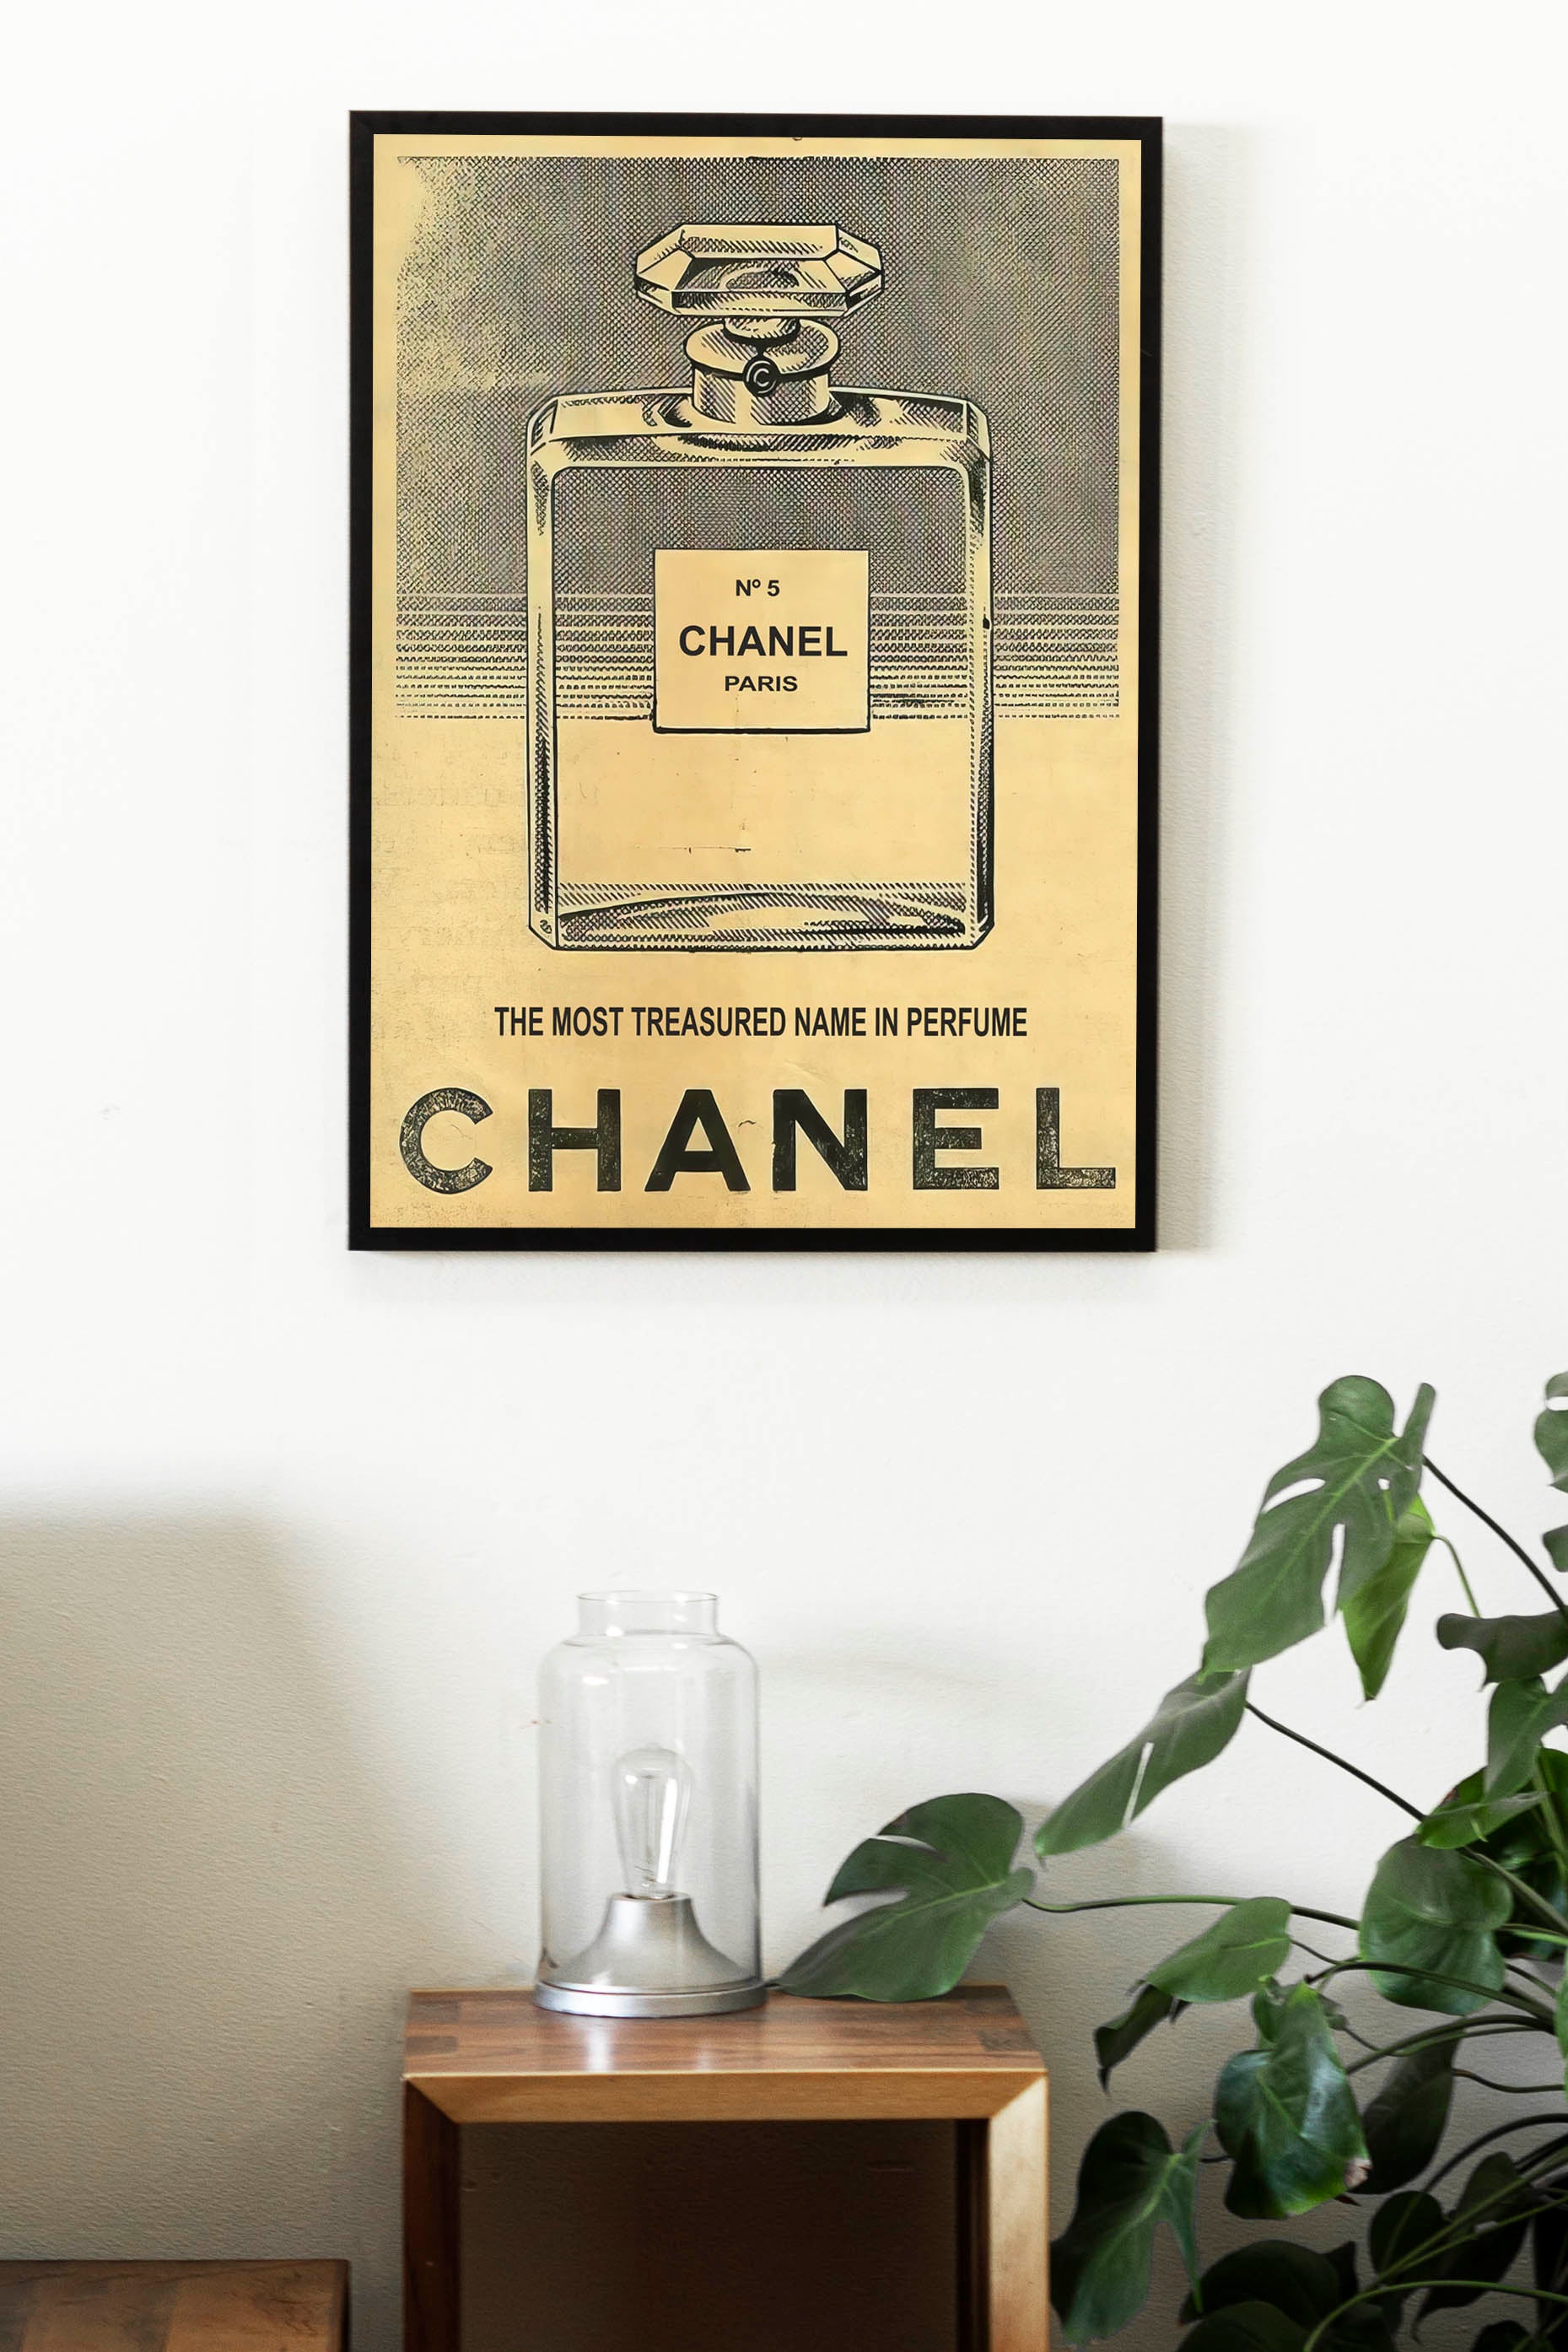 Chanel No 5 Red Perfume Bottle Water Color Art Print